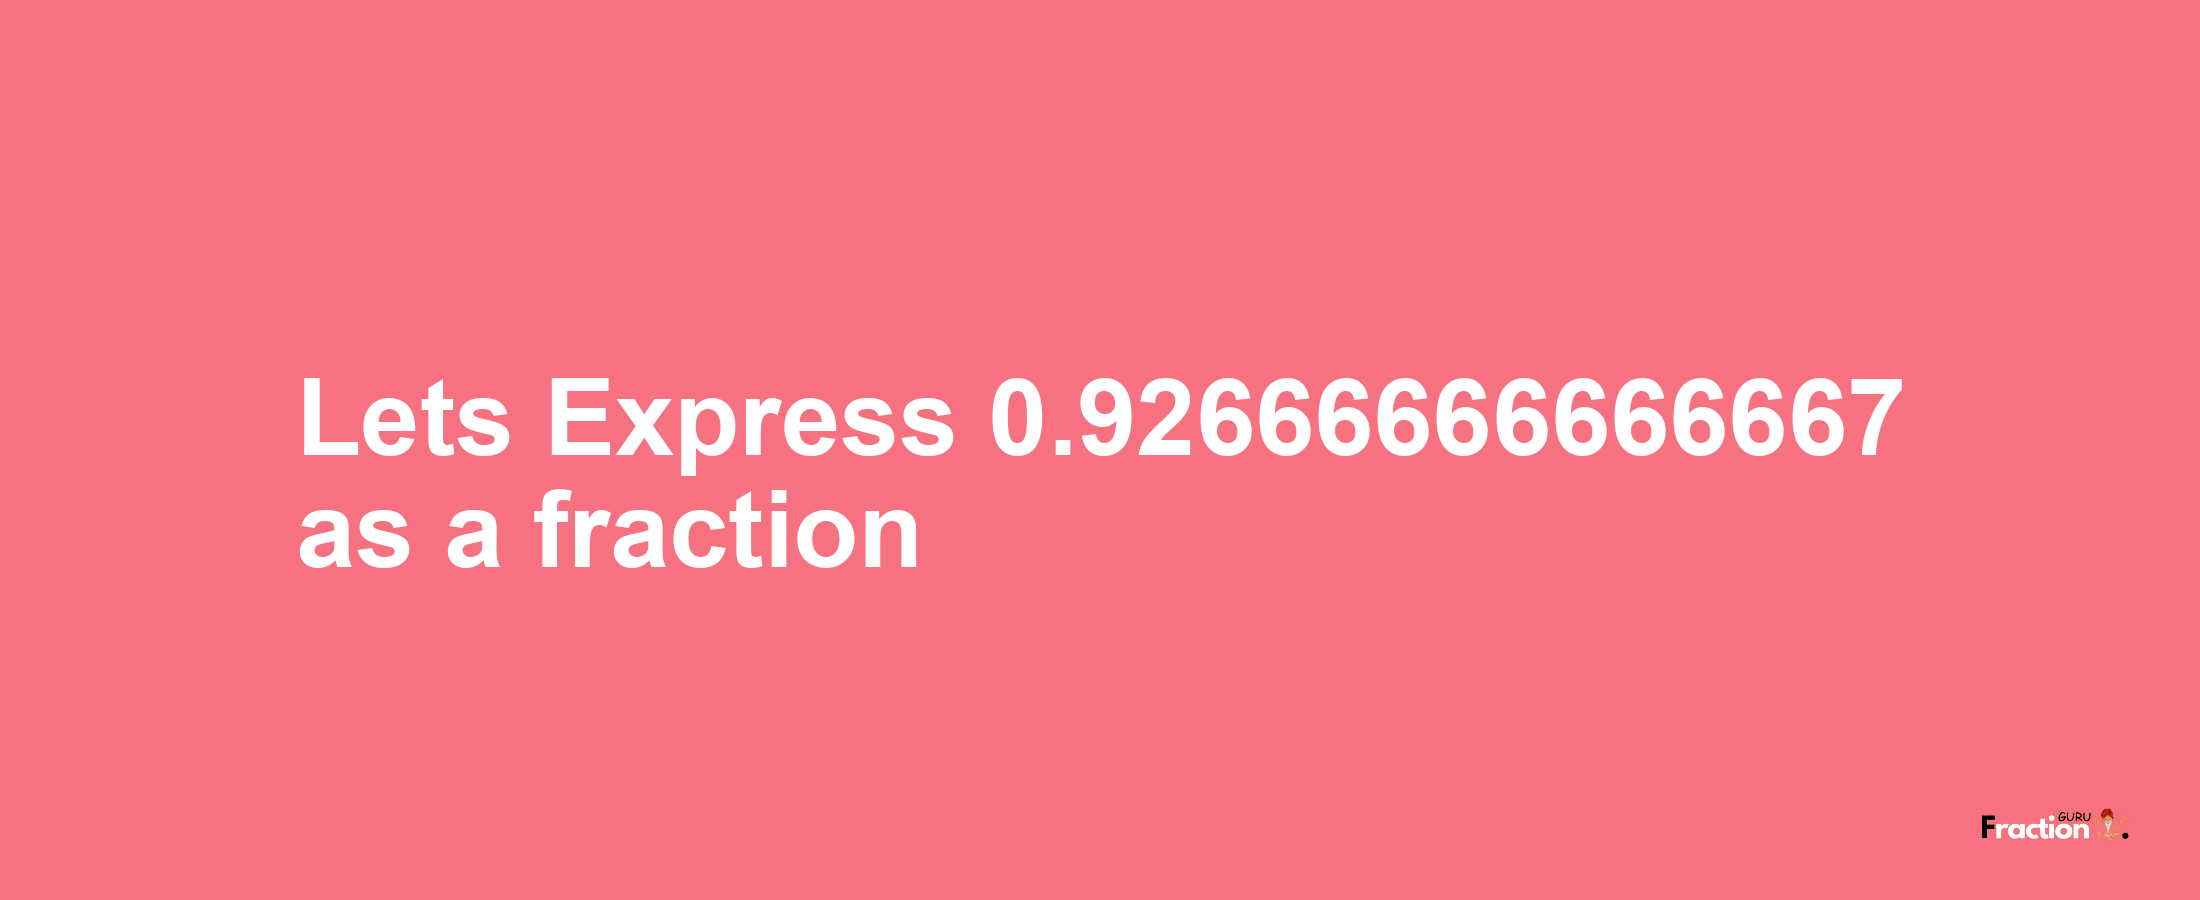 Lets Express 0.92666666666667 as afraction